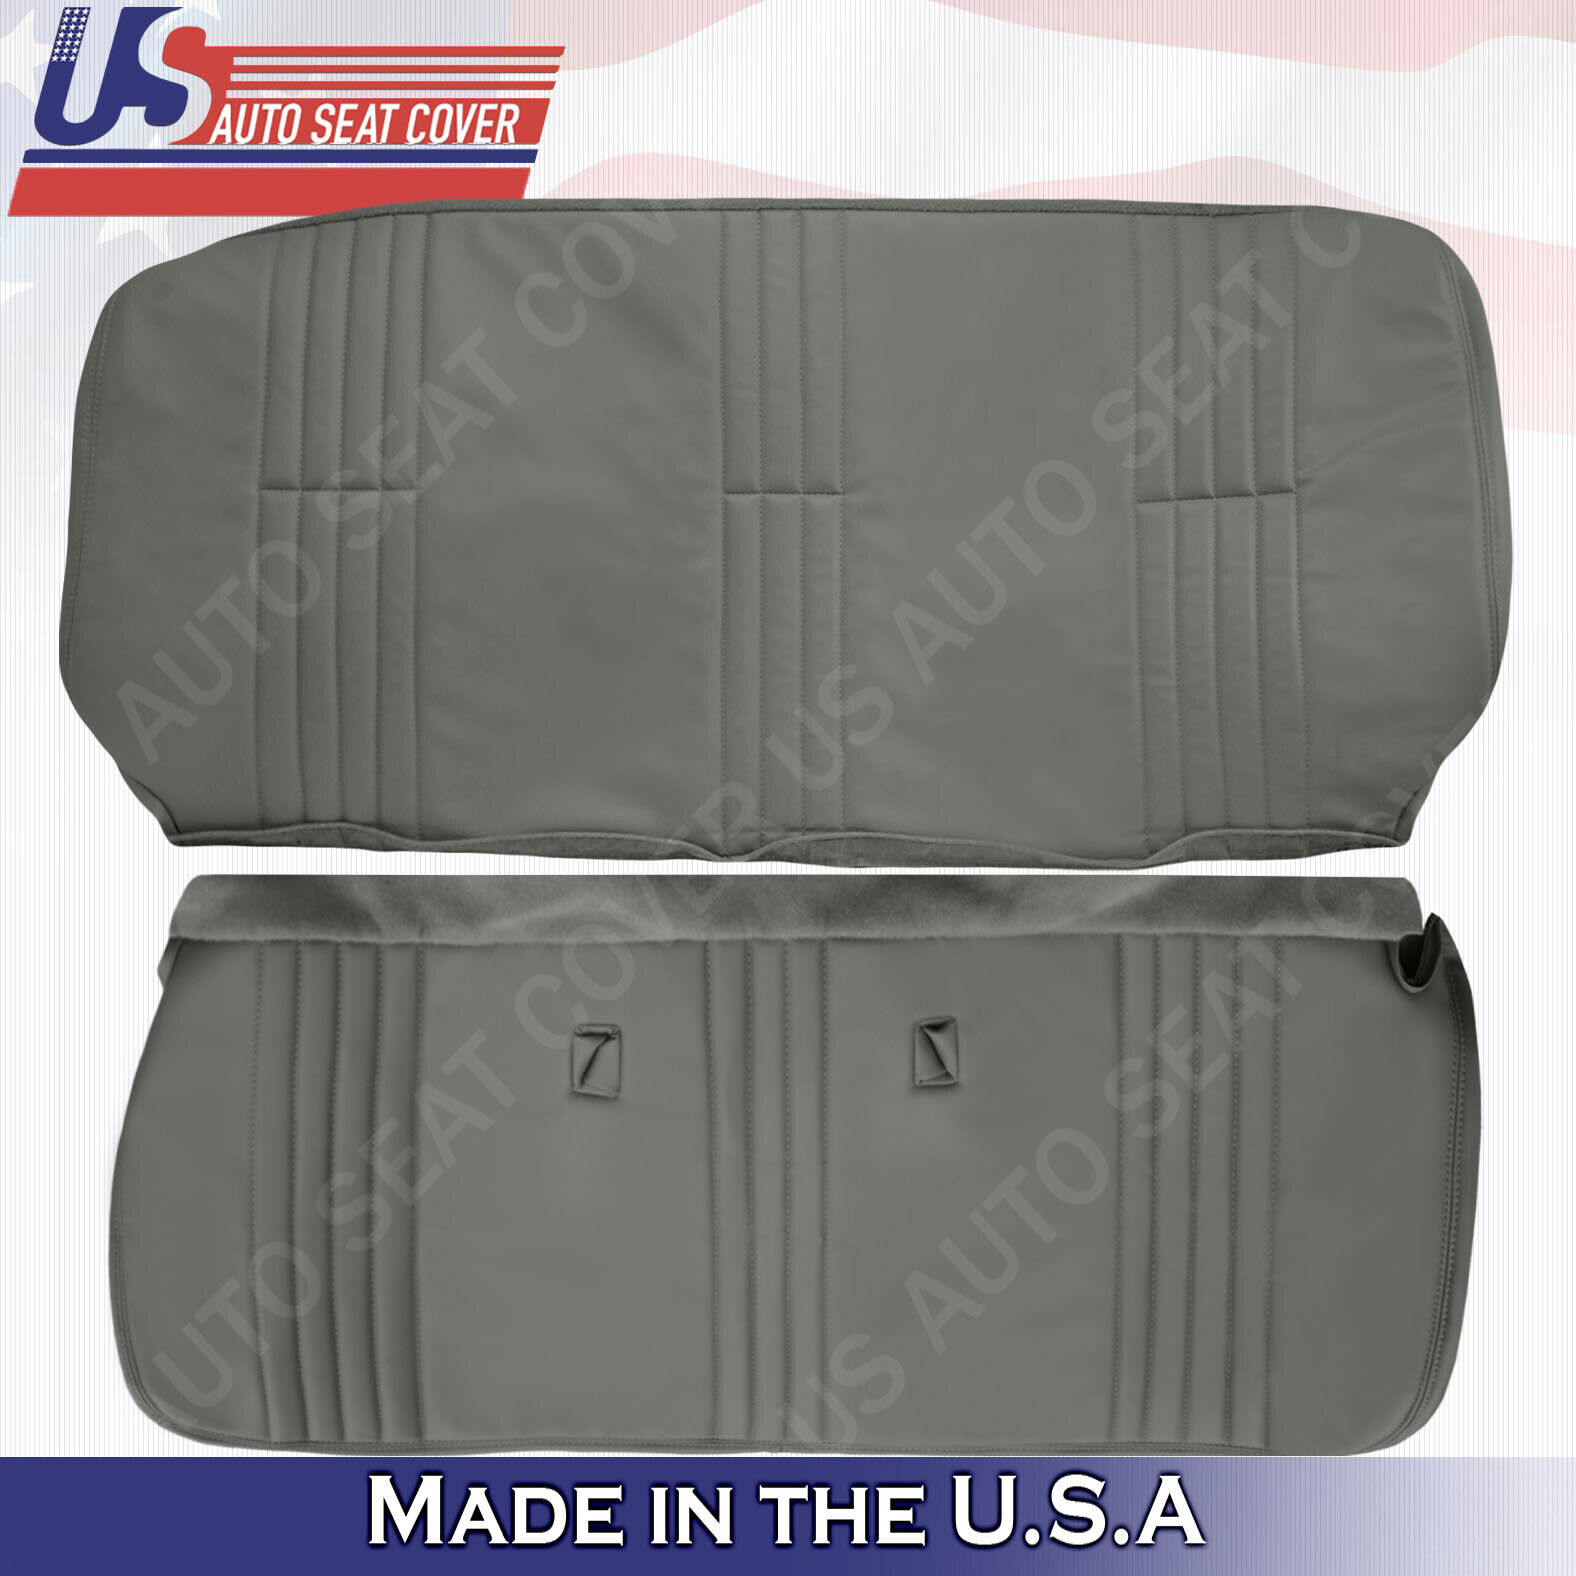 1995 to 1998 Fits for Chevy/GMC Sierra Cheyenne Bench Top Bottom Covers Gray